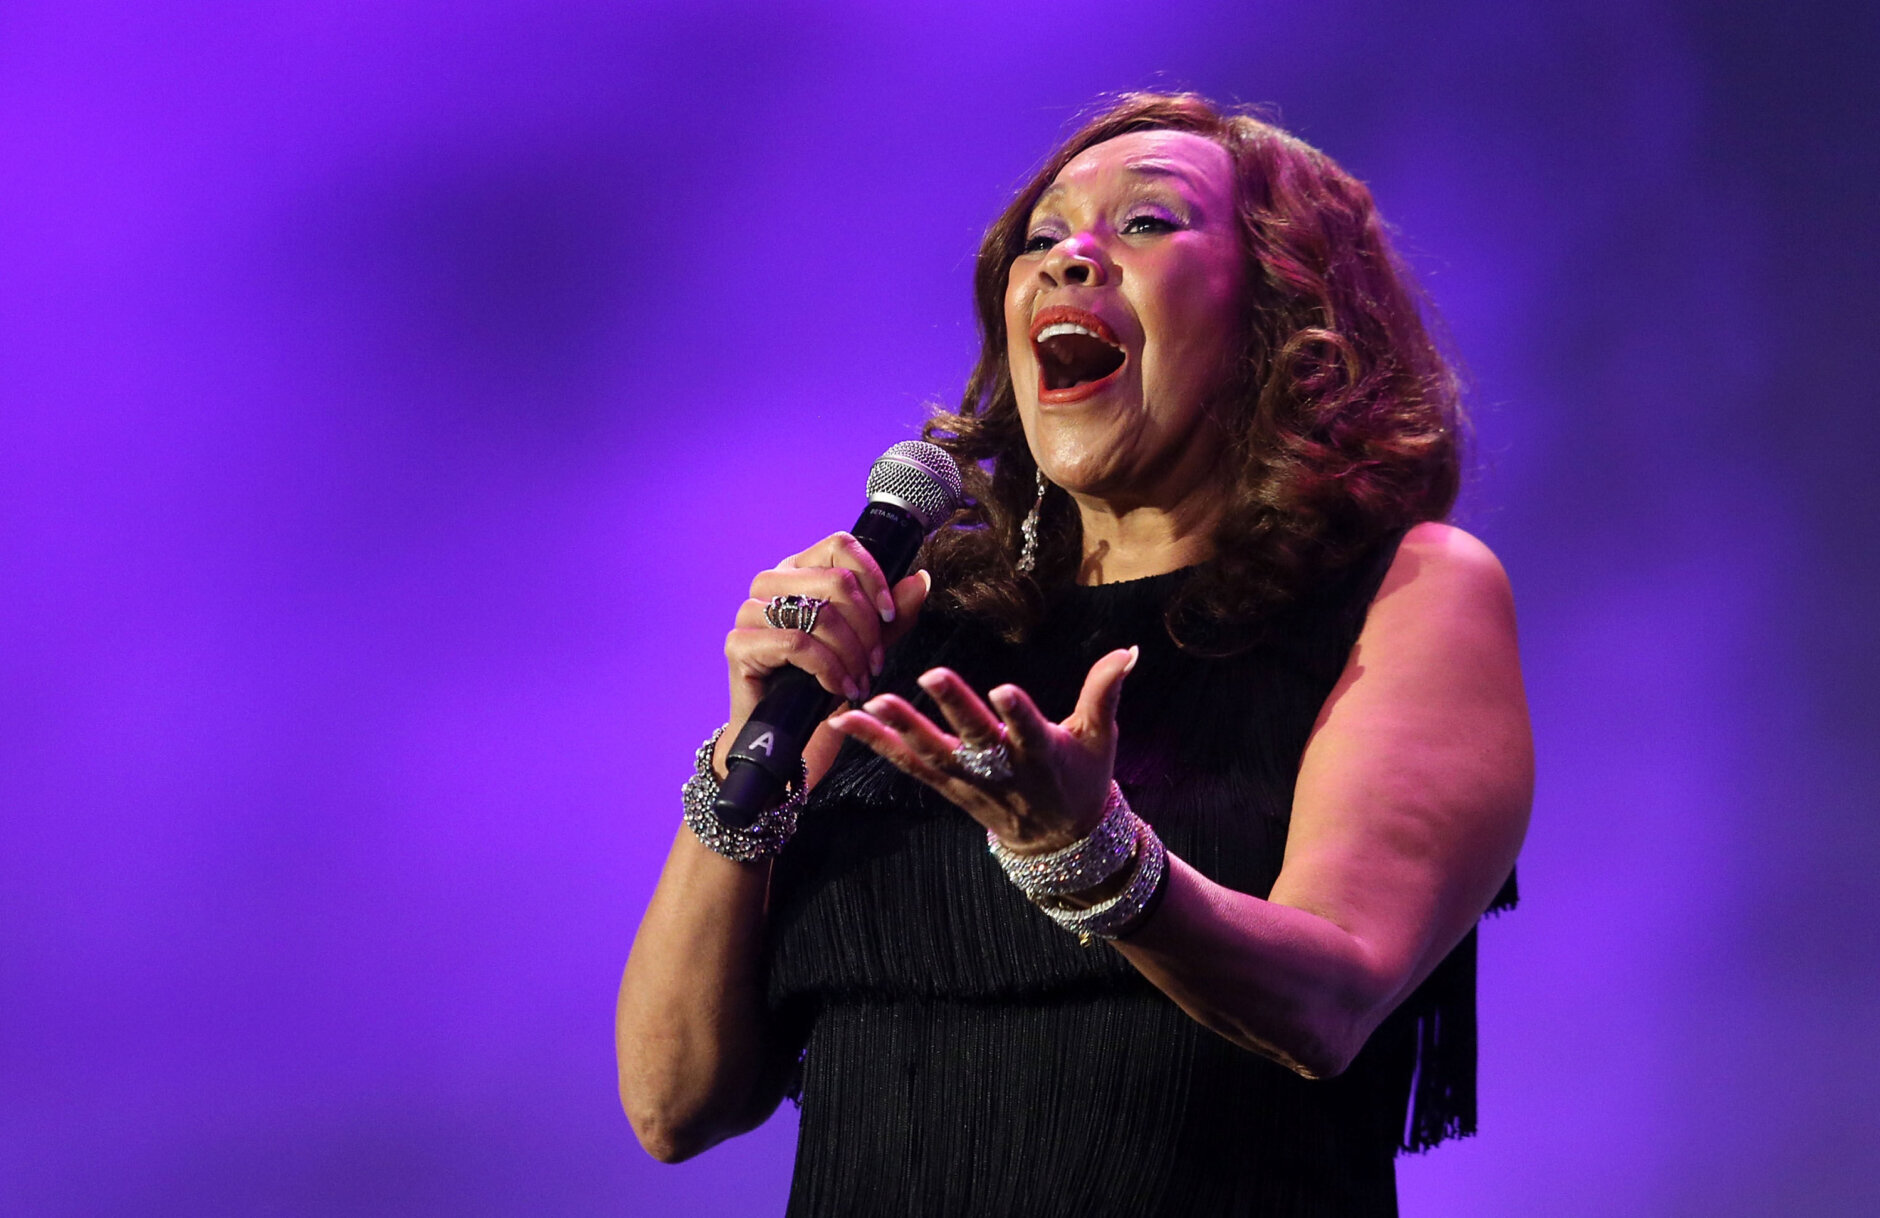 BEVERLY HILLS, CA - MARCH 03:  Anita Pointer of the Pointer Sisters performs onstage at the Venice Family Clinic's 32nd Annual Silver Circle Gala held at The Beverly Hilton Hotel on March 3, 2014 in Beverly Hills, California.  (Photo by Mike Windle/Getty Images for VFC)